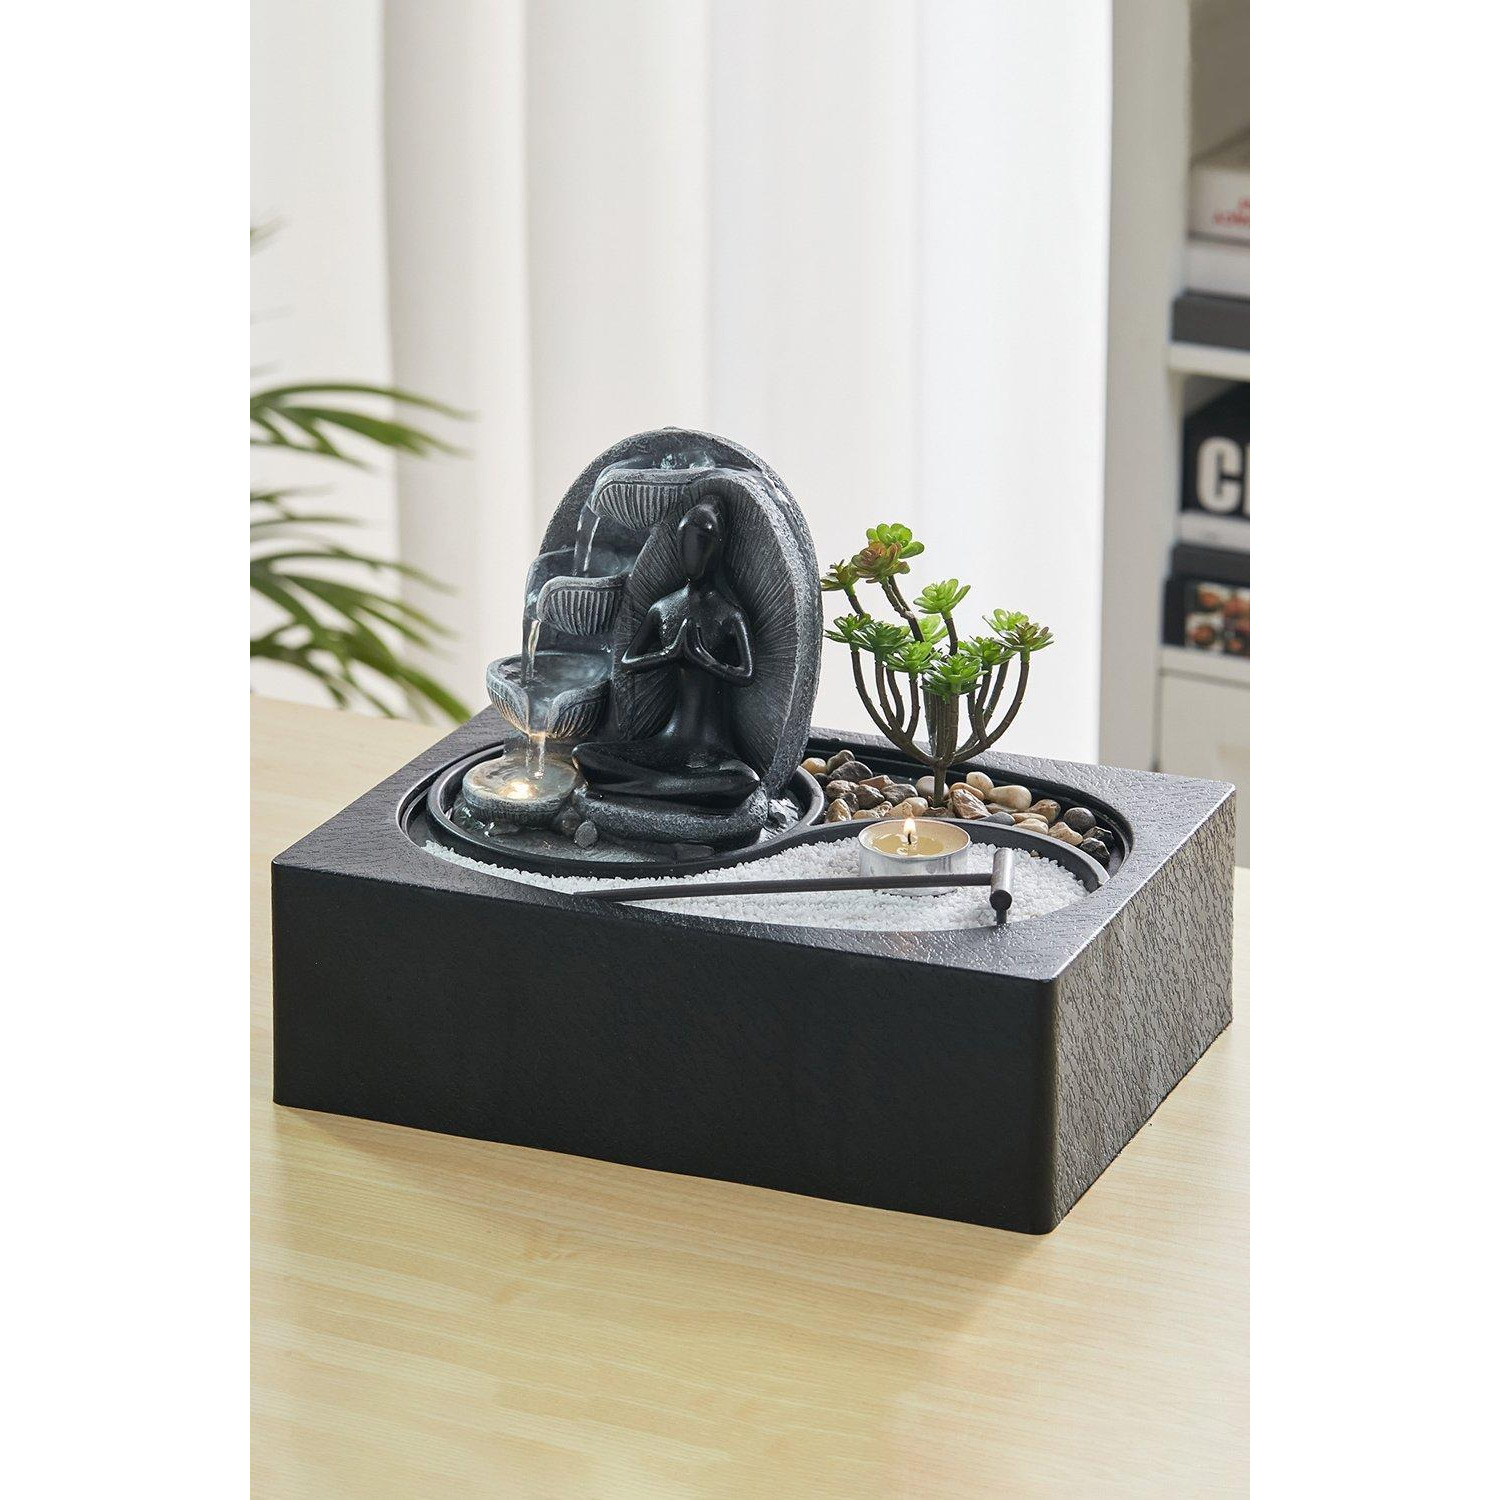 Meditator Statue Tabletop Water Fountain with LED Light - image 1